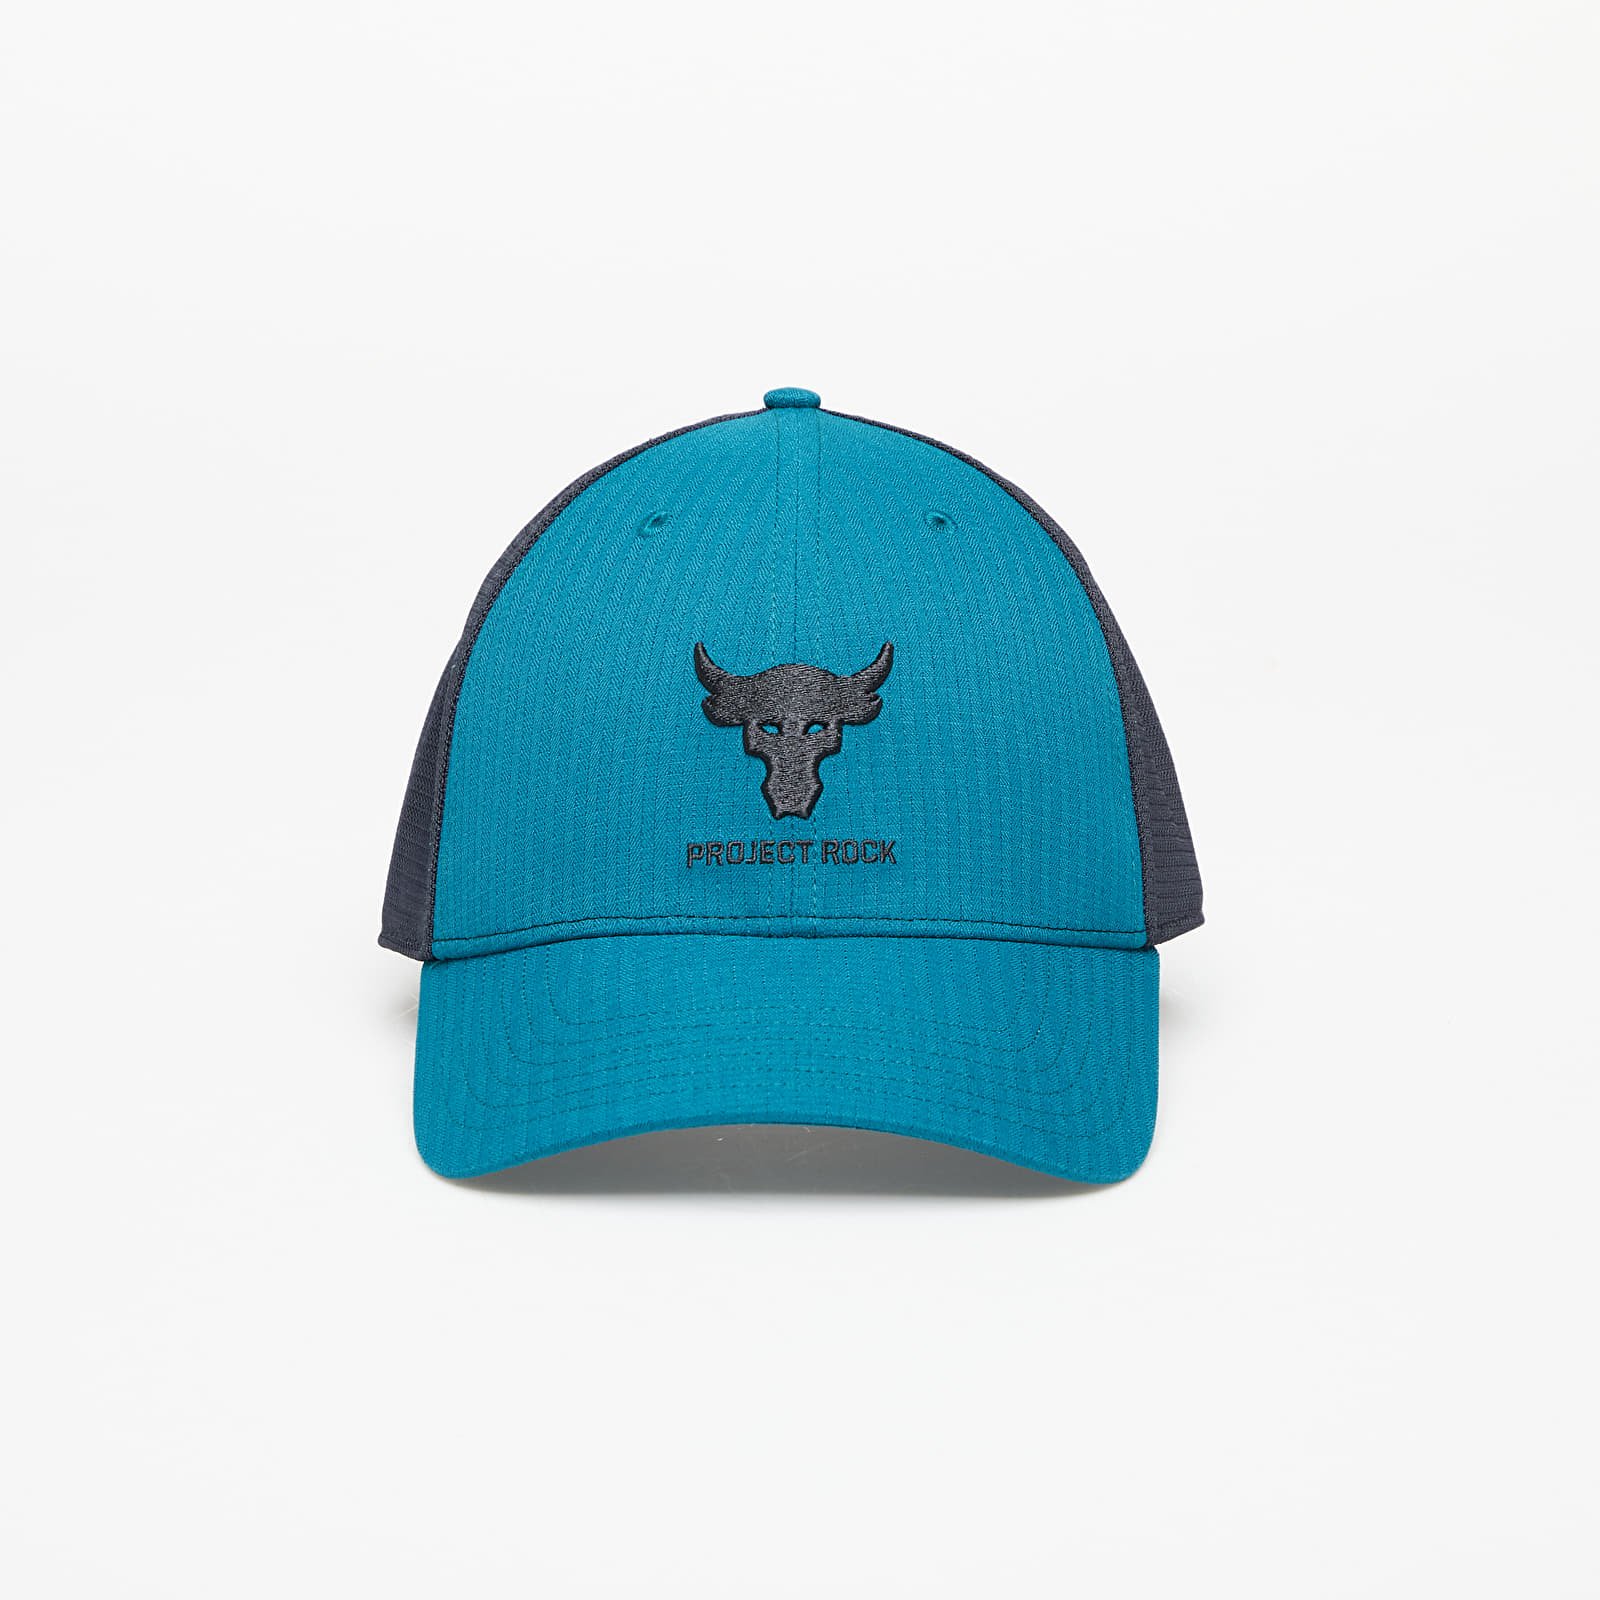 Caps Under Armour Project Rock Trucker Cap Hydro Teal/ Black